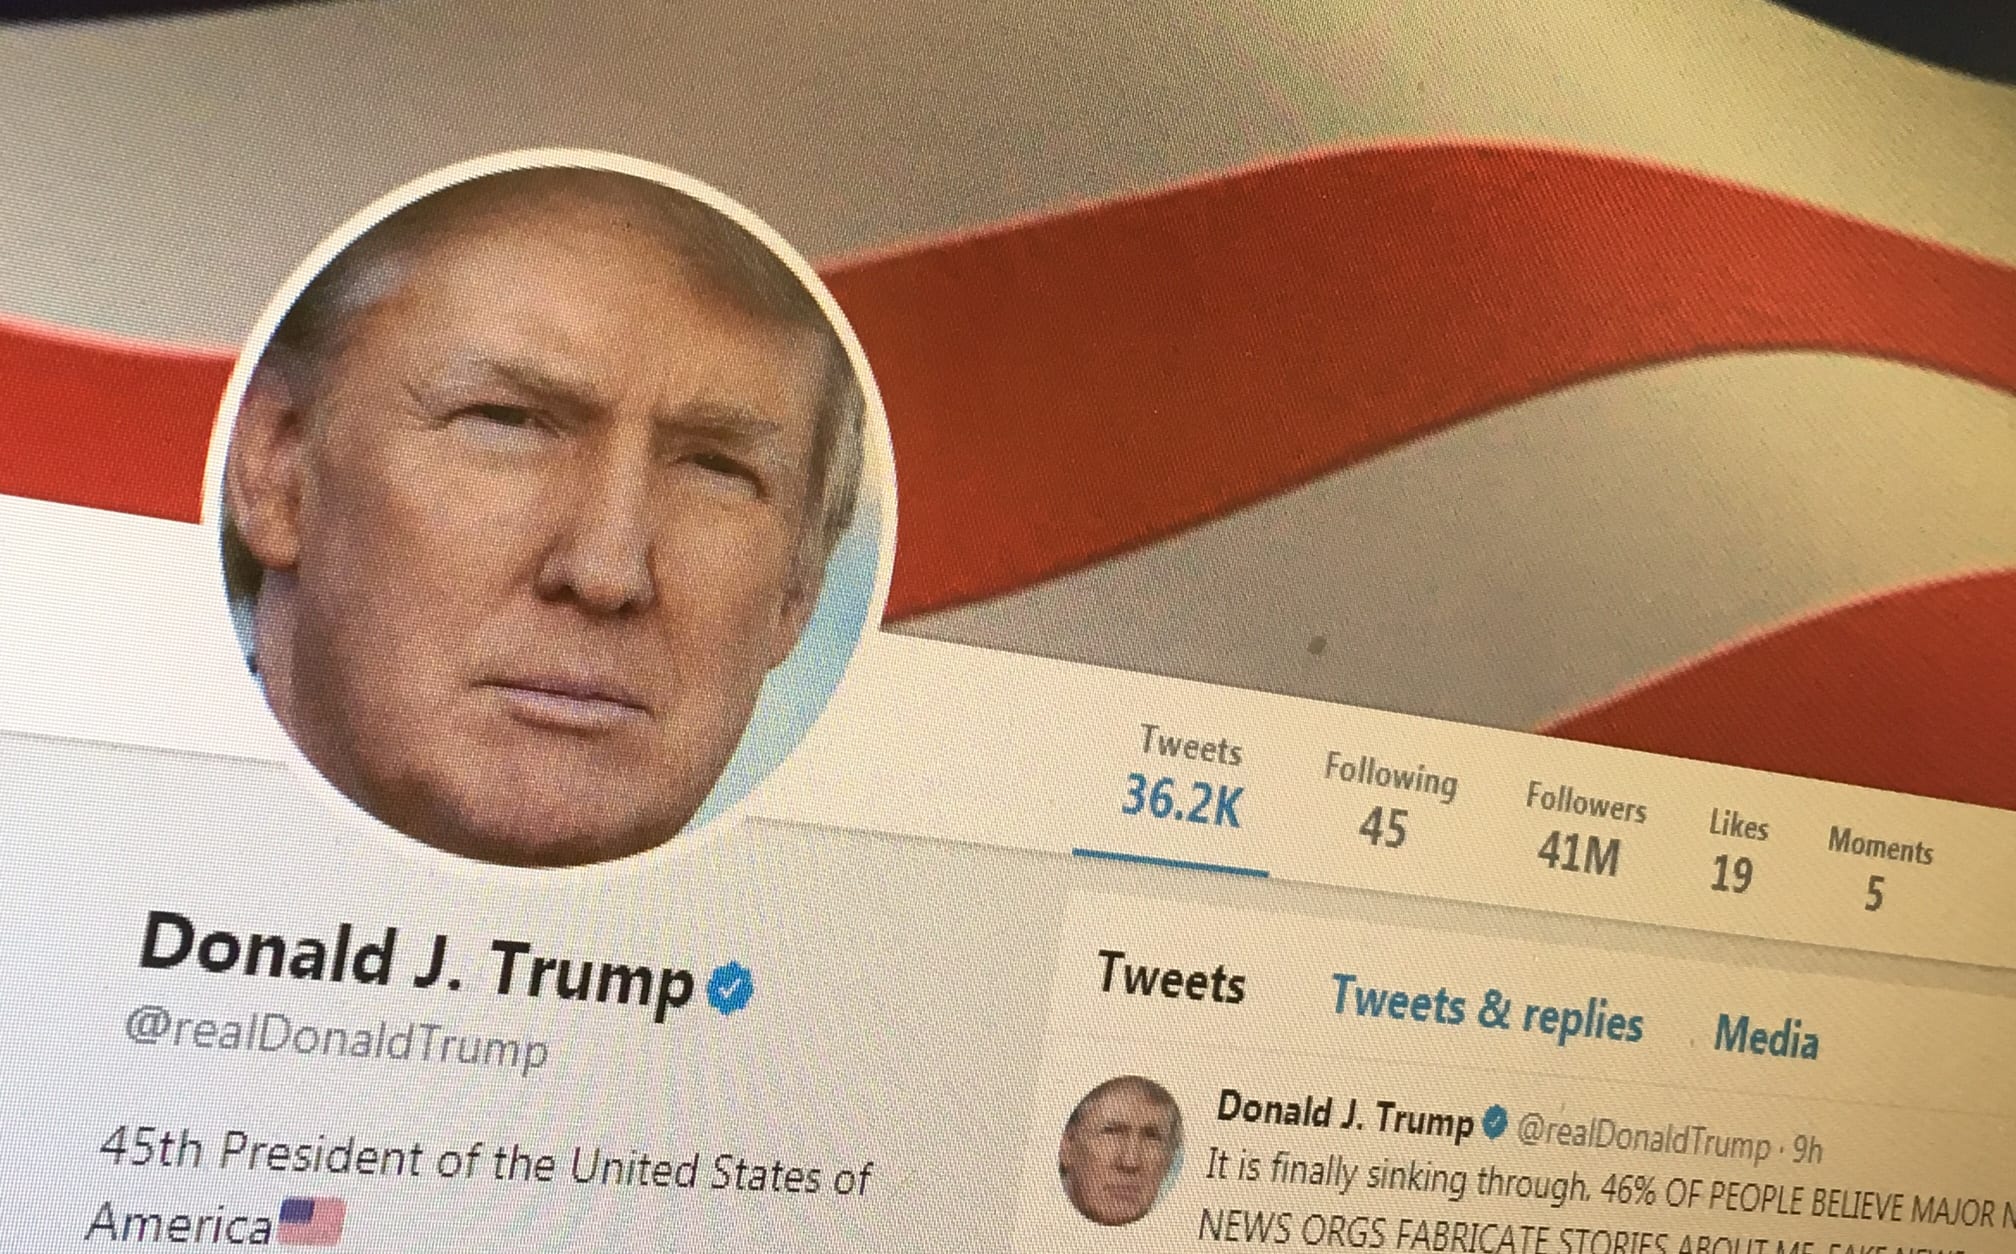 Donald Trump has an official @POTUS Twitter account, but more often tweets from his personal account